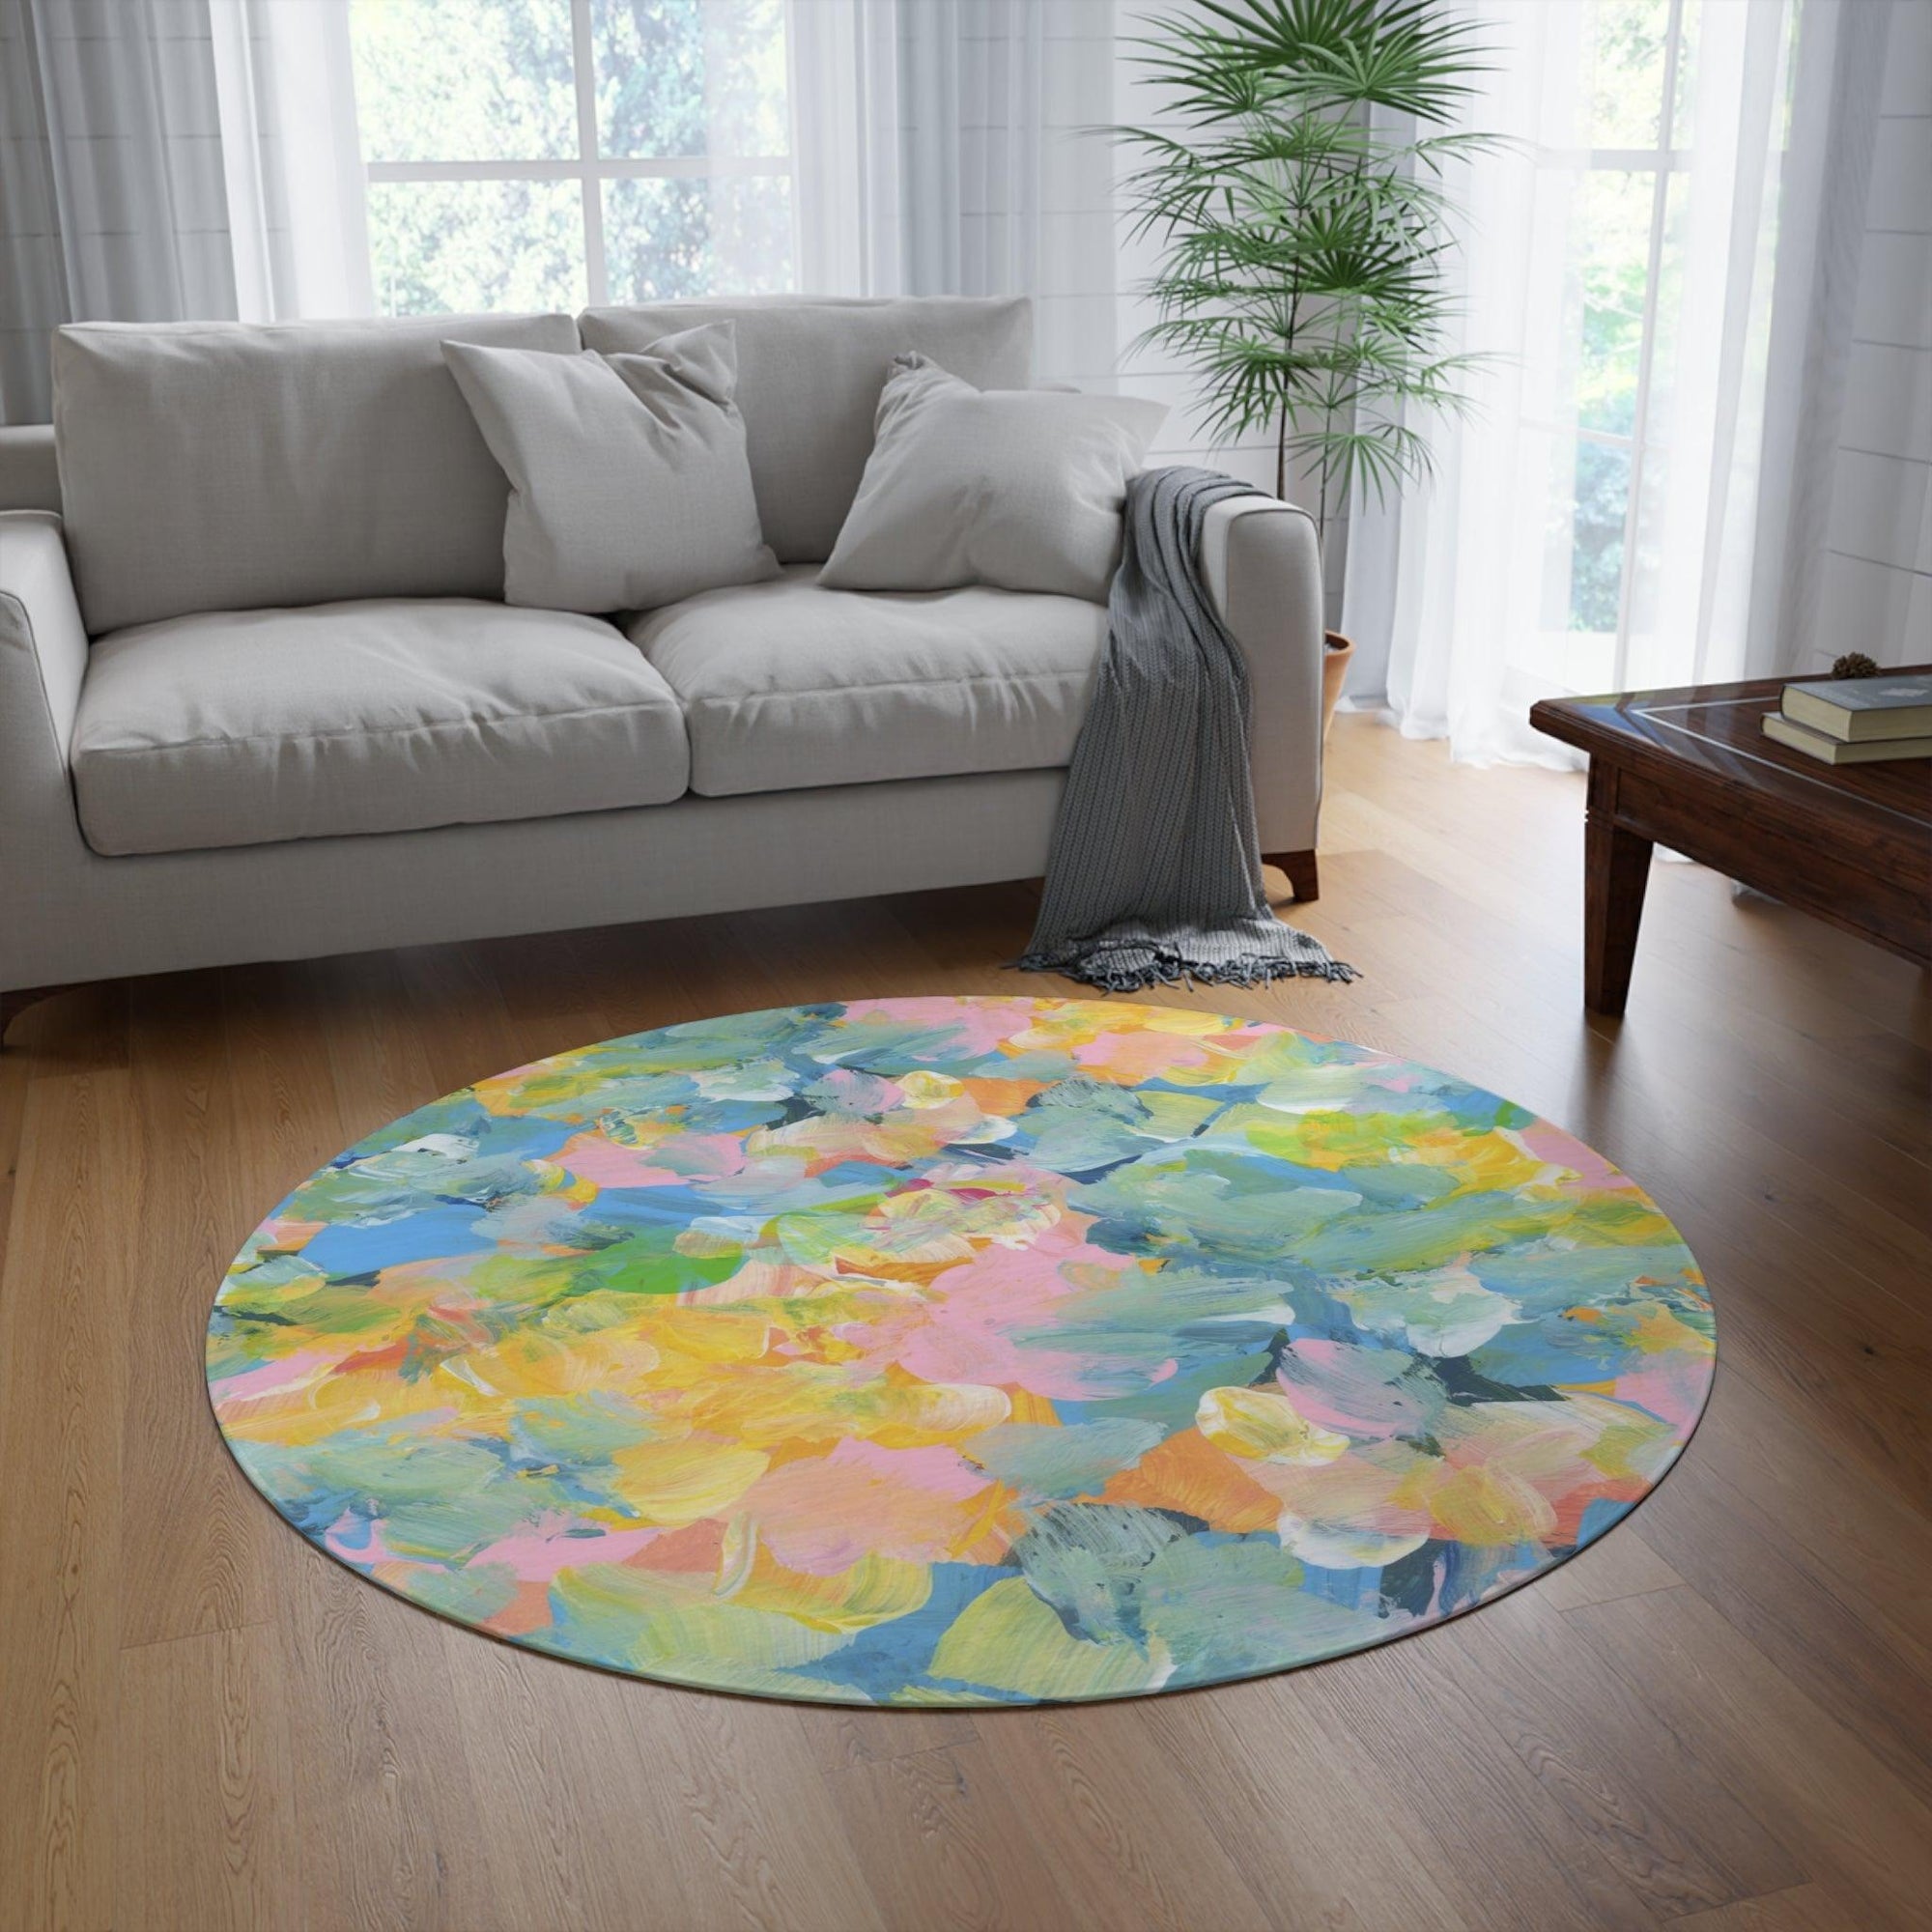 Watercolor Vibrant Chenille Circle Rug - 60x60 Inch by Maison d'Elite